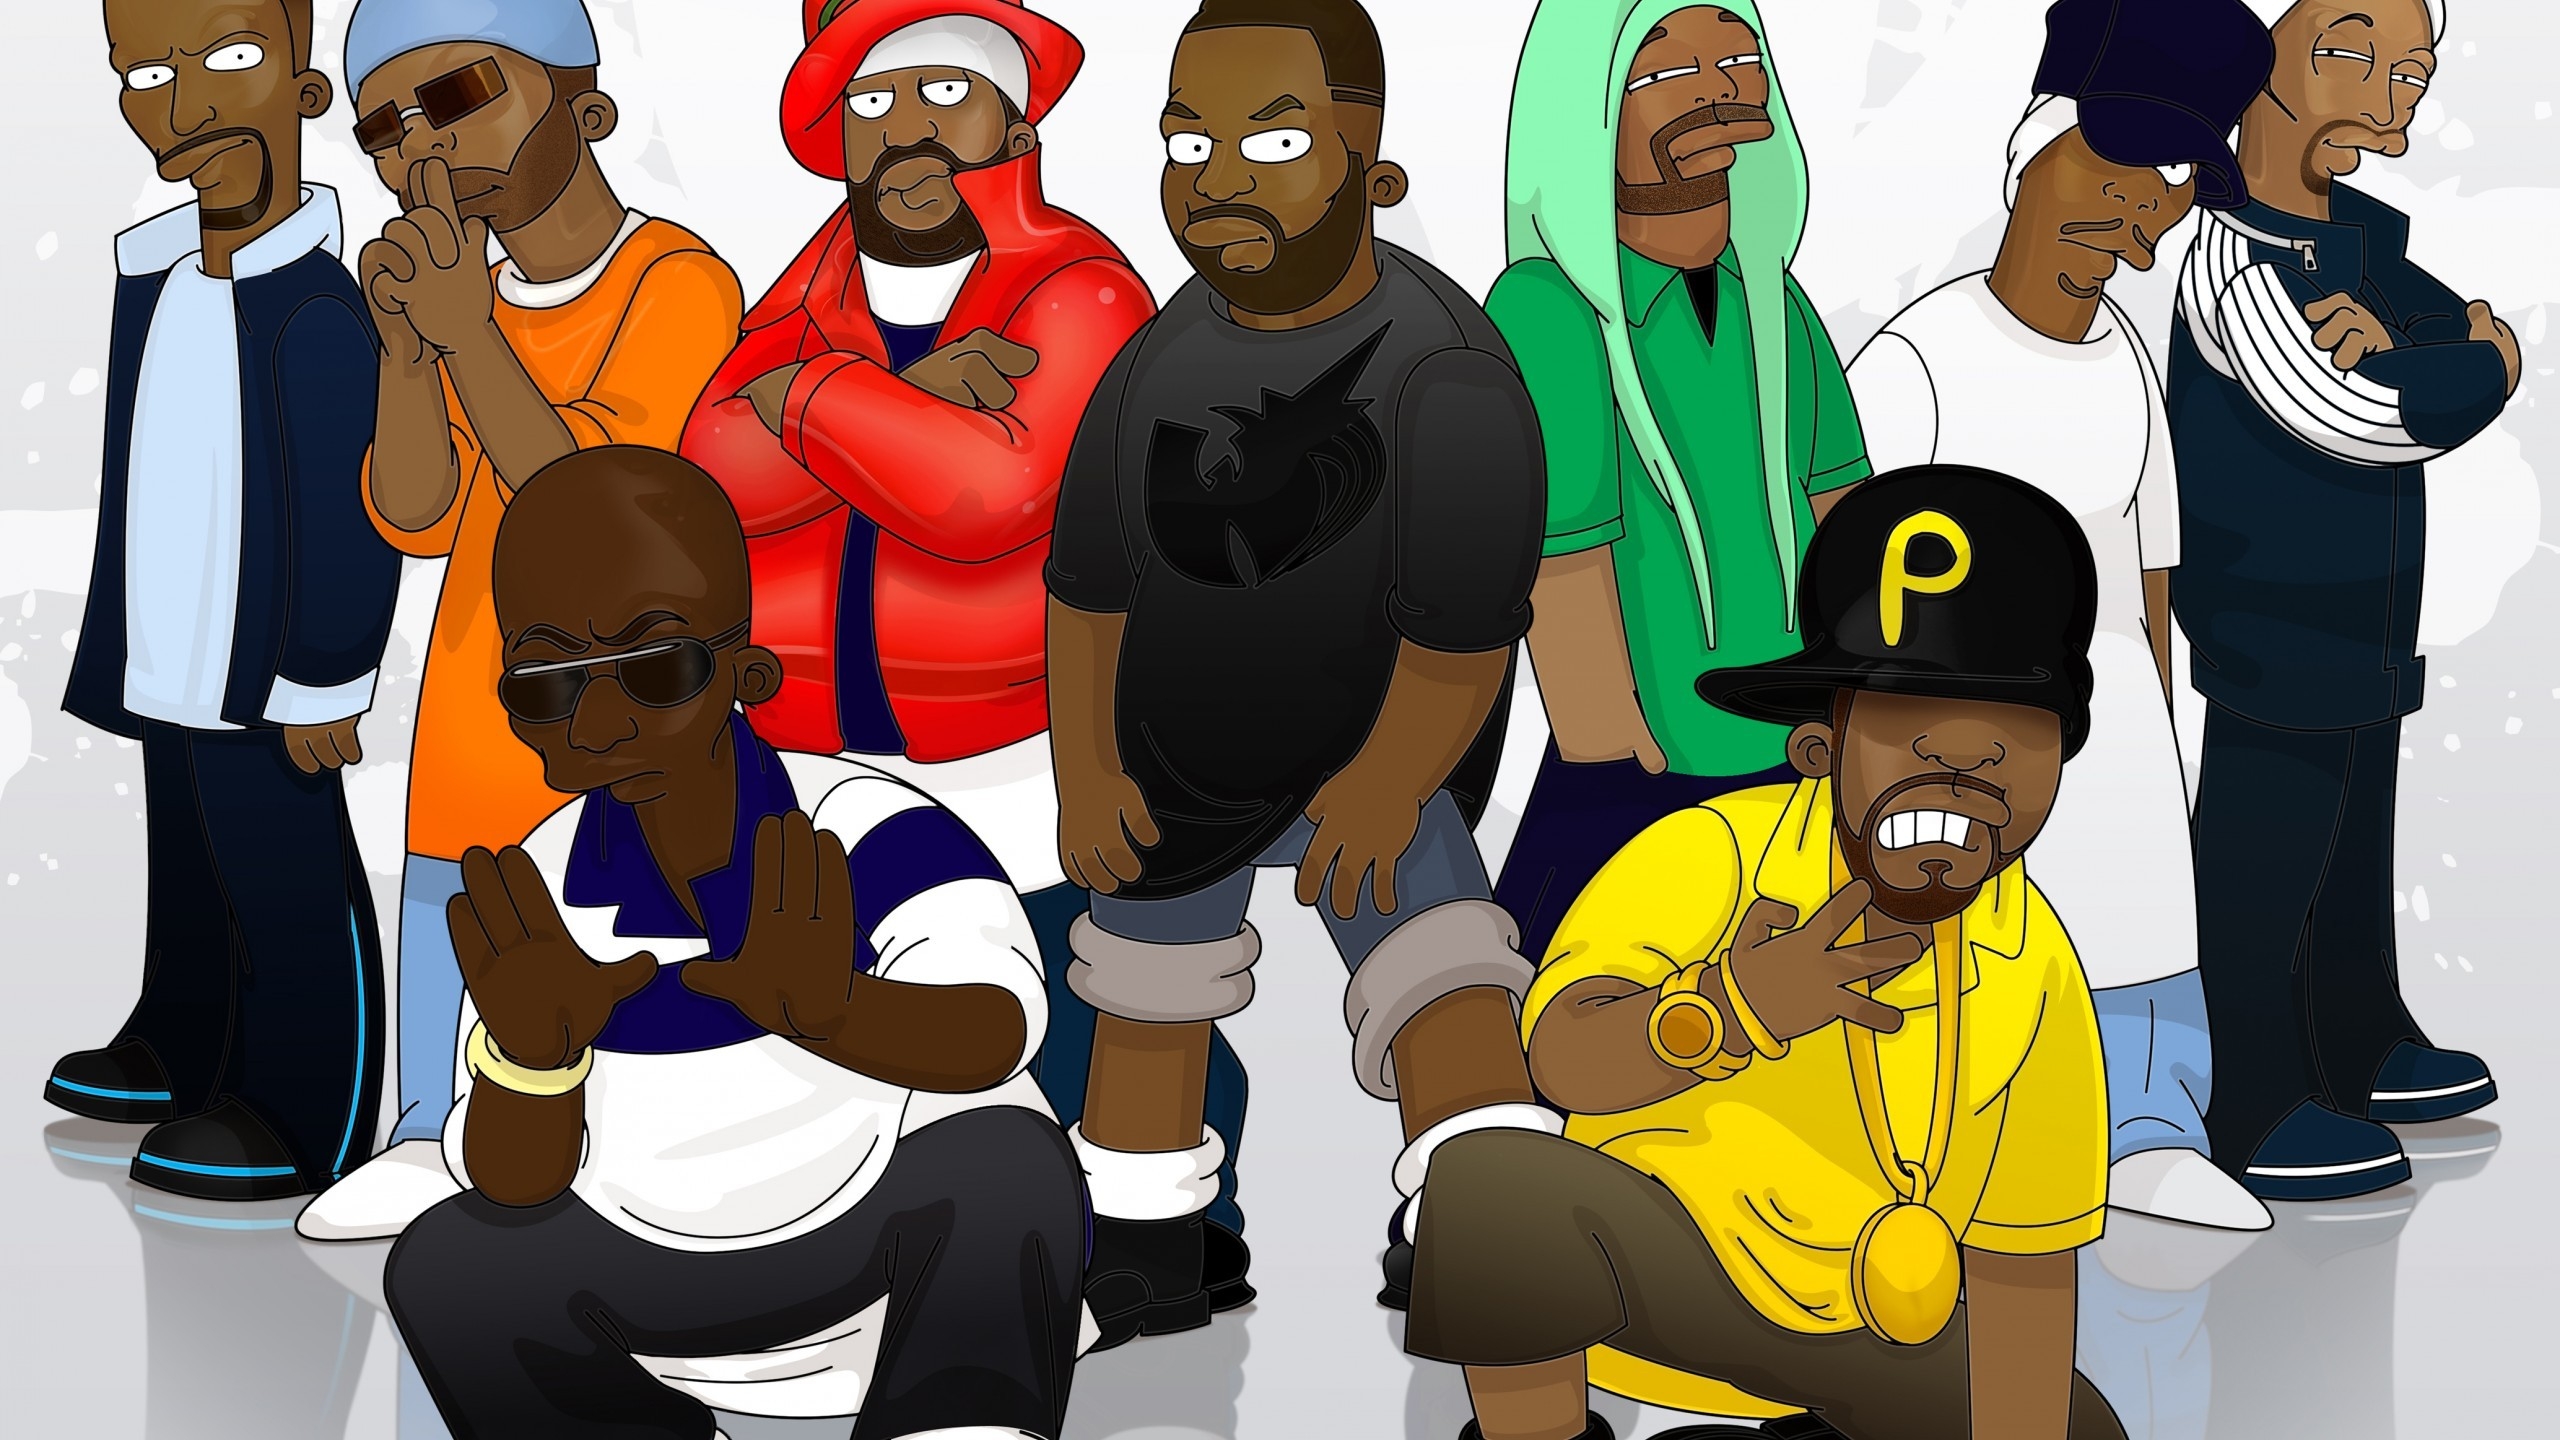 Wu-Tang Clan Group for 2560x1440 HDTV resolution